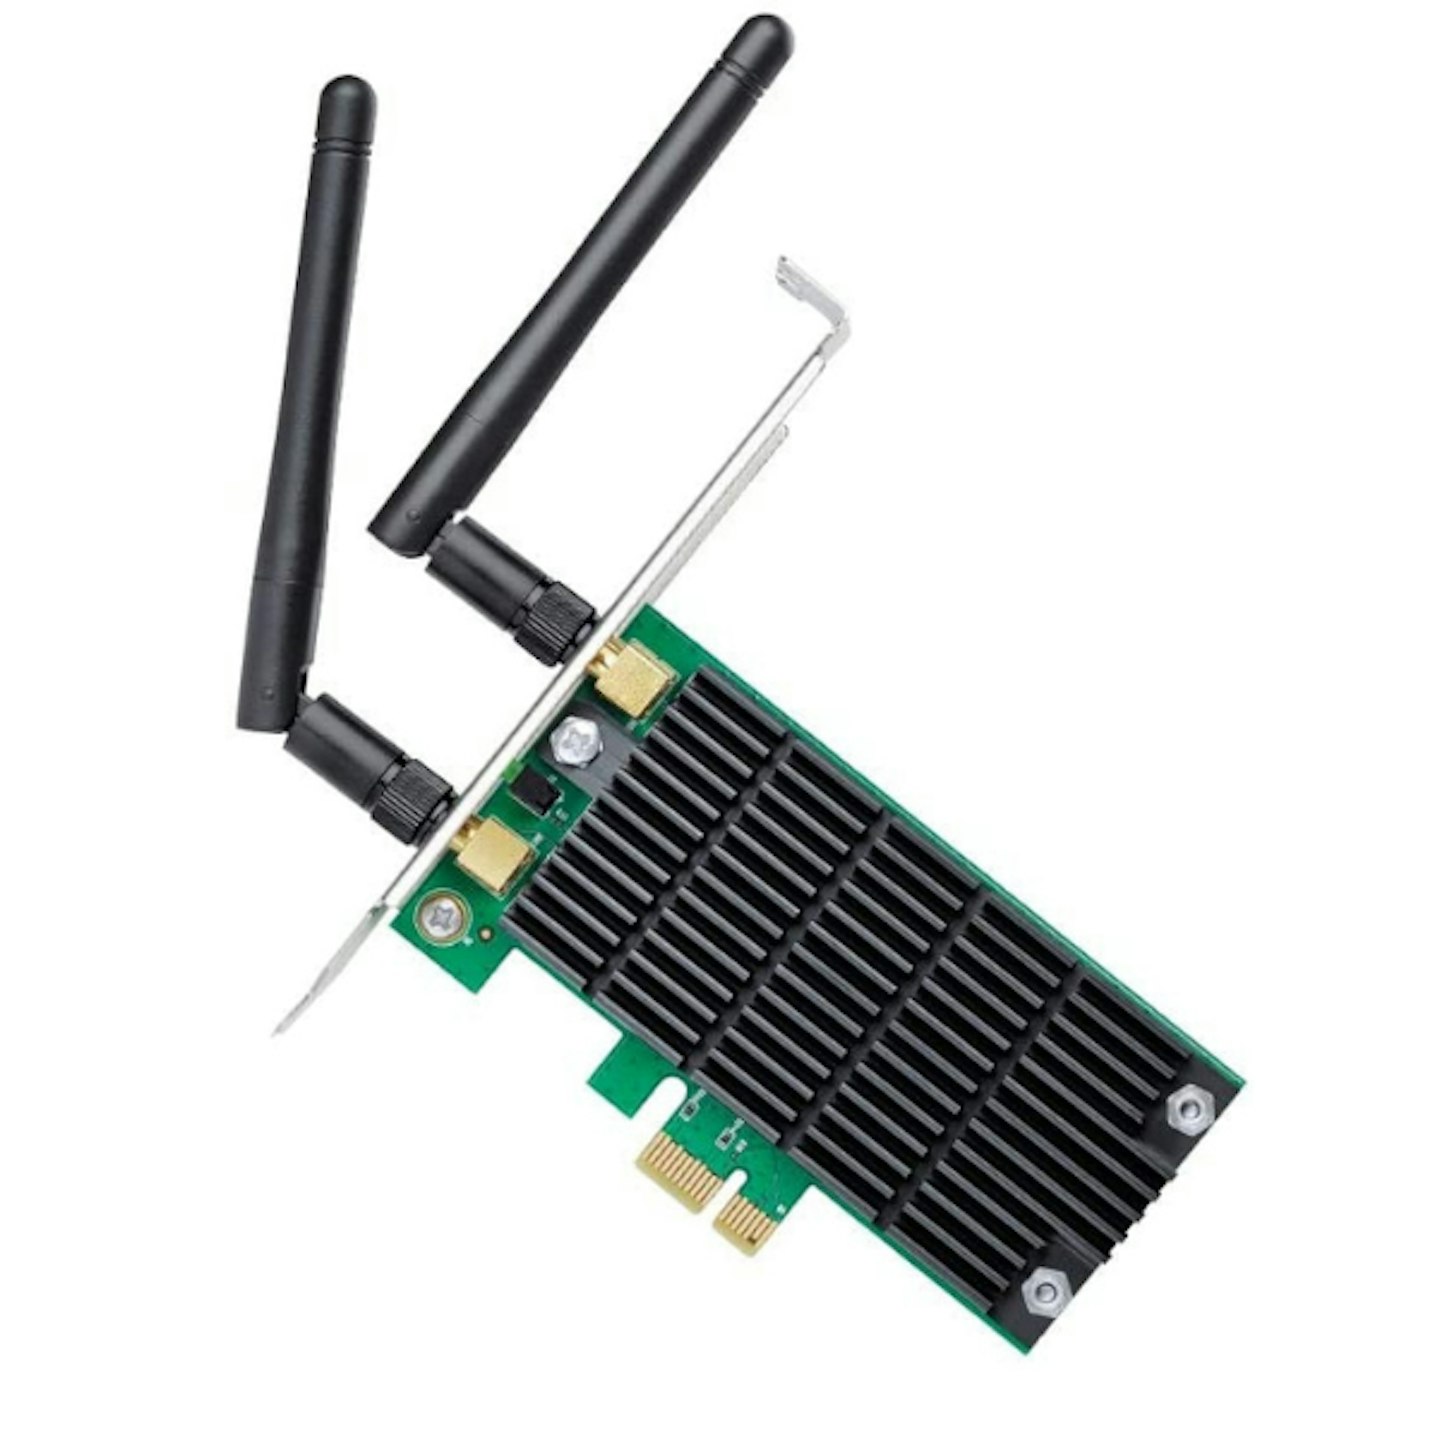 TP-Link AC1200 Dual Band Wireless PCI Express Adapter with Two Antennas